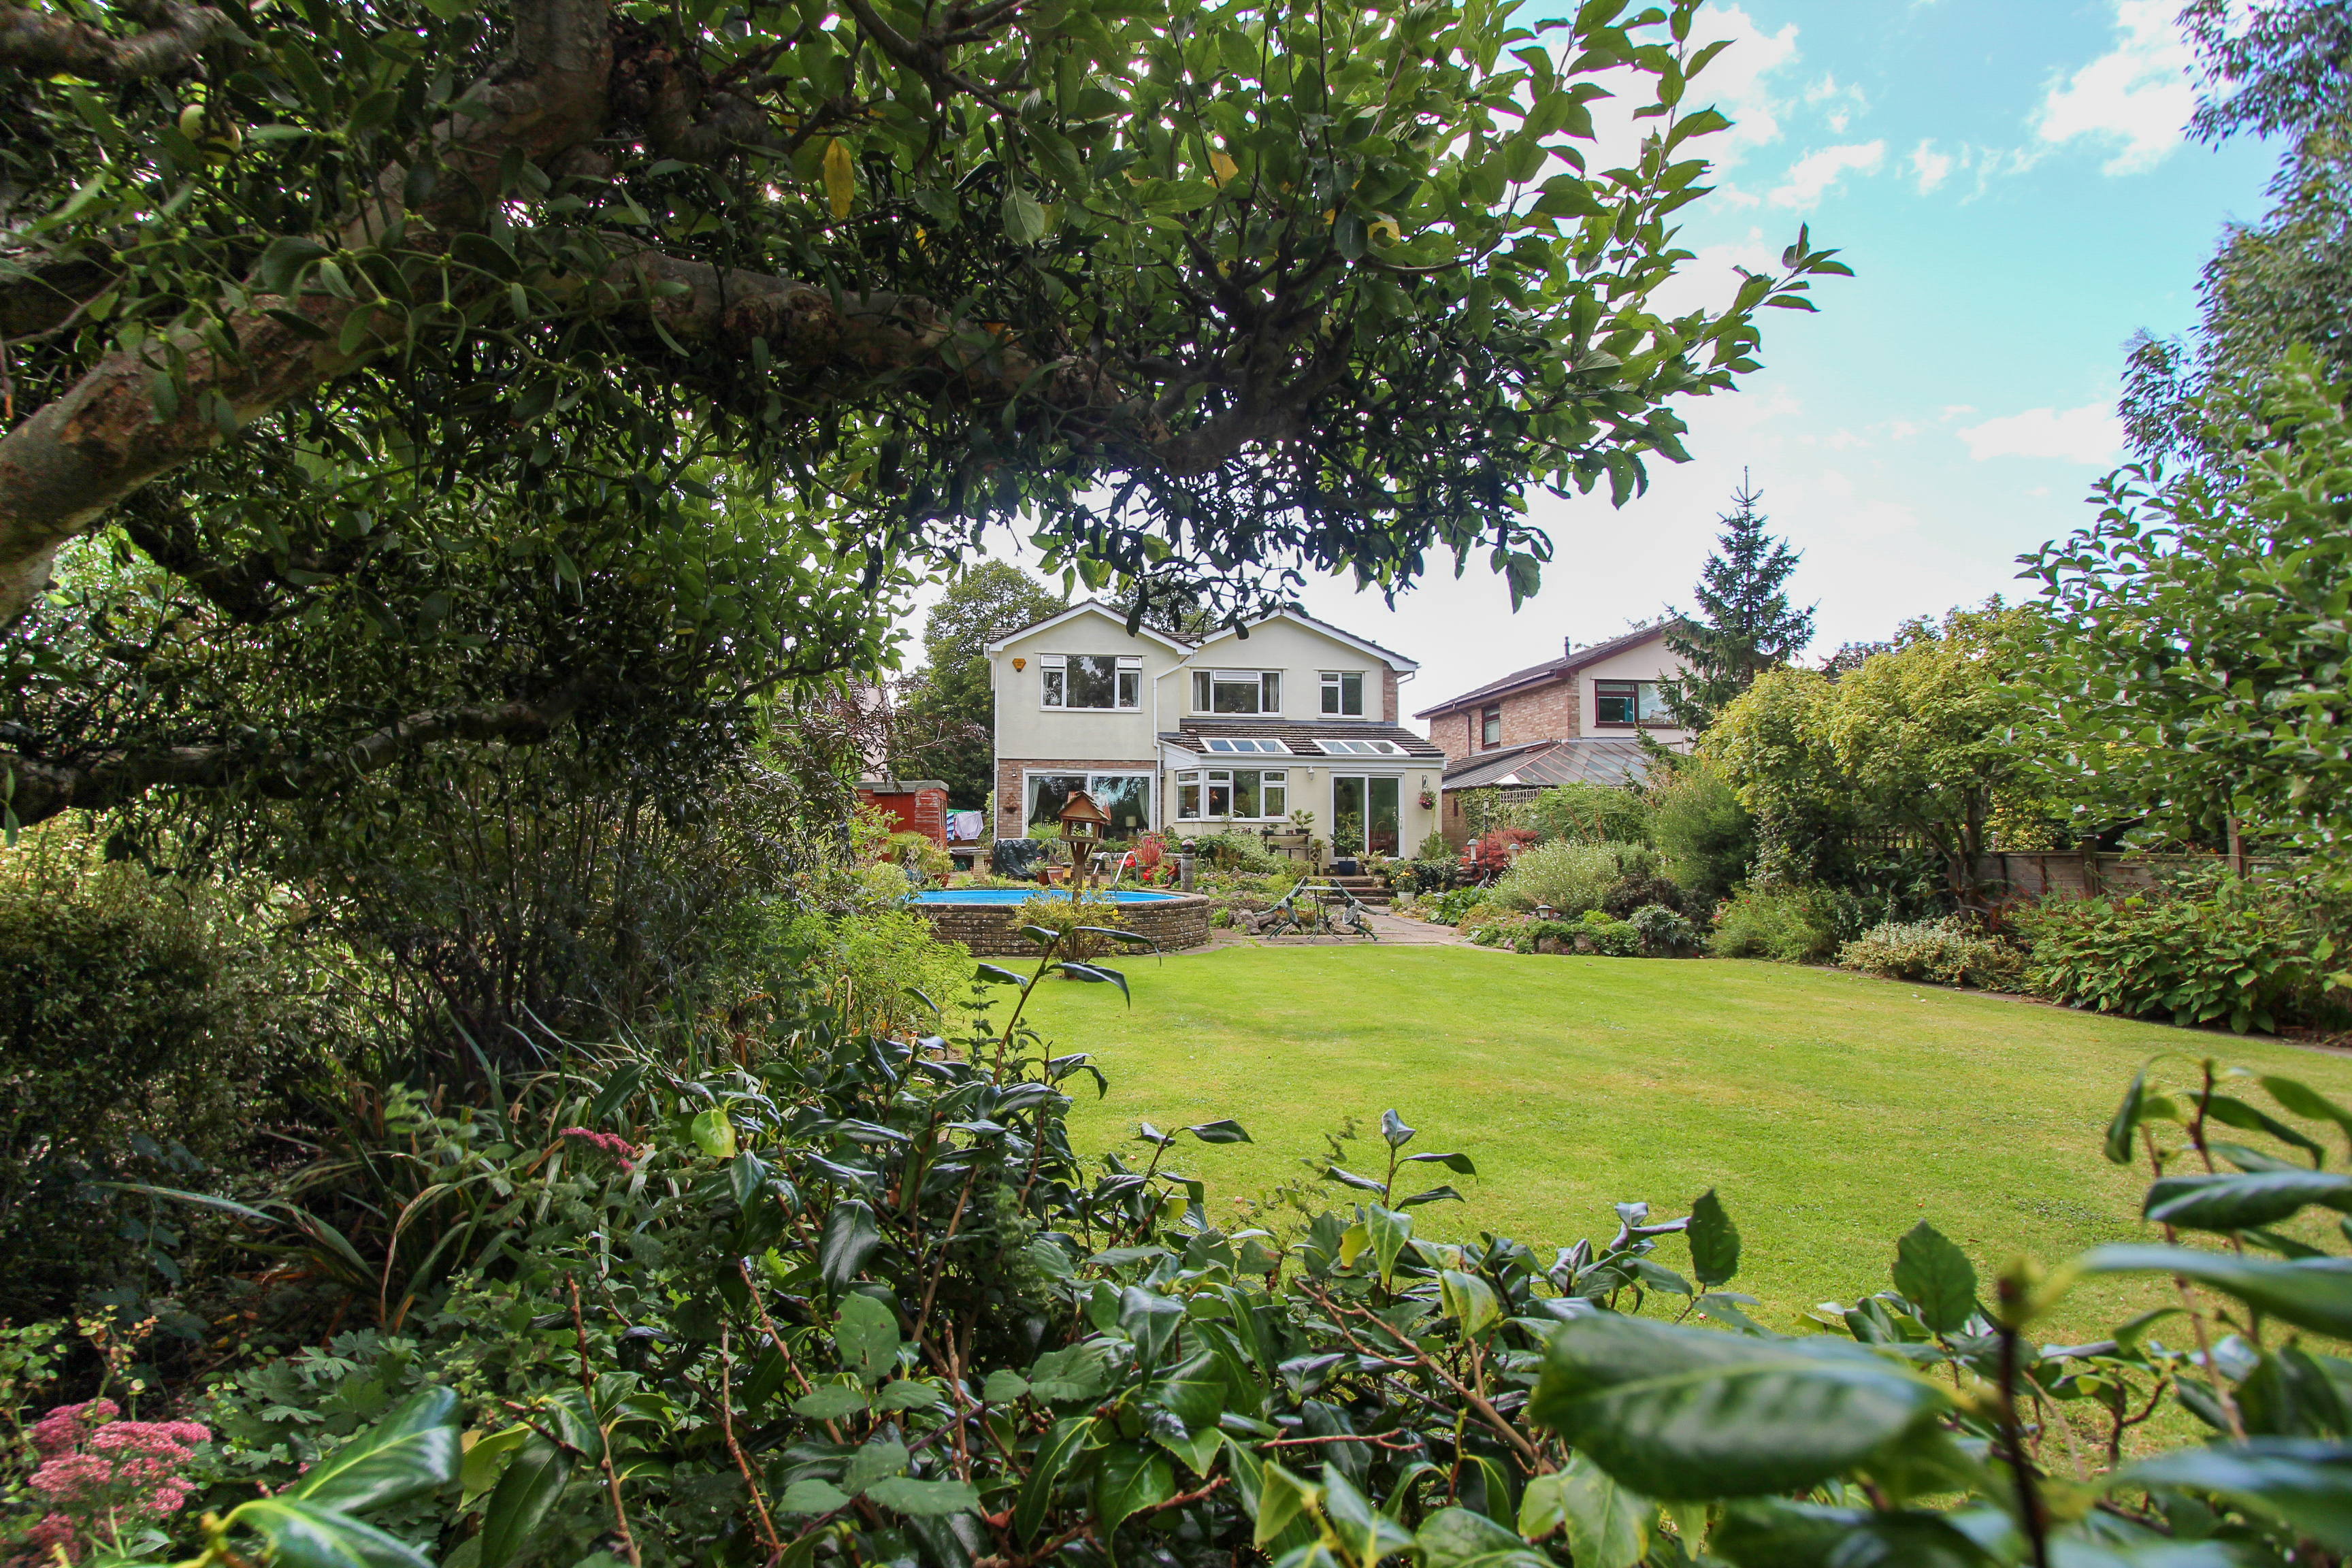 Family home with a stunning rear garden in Yatton